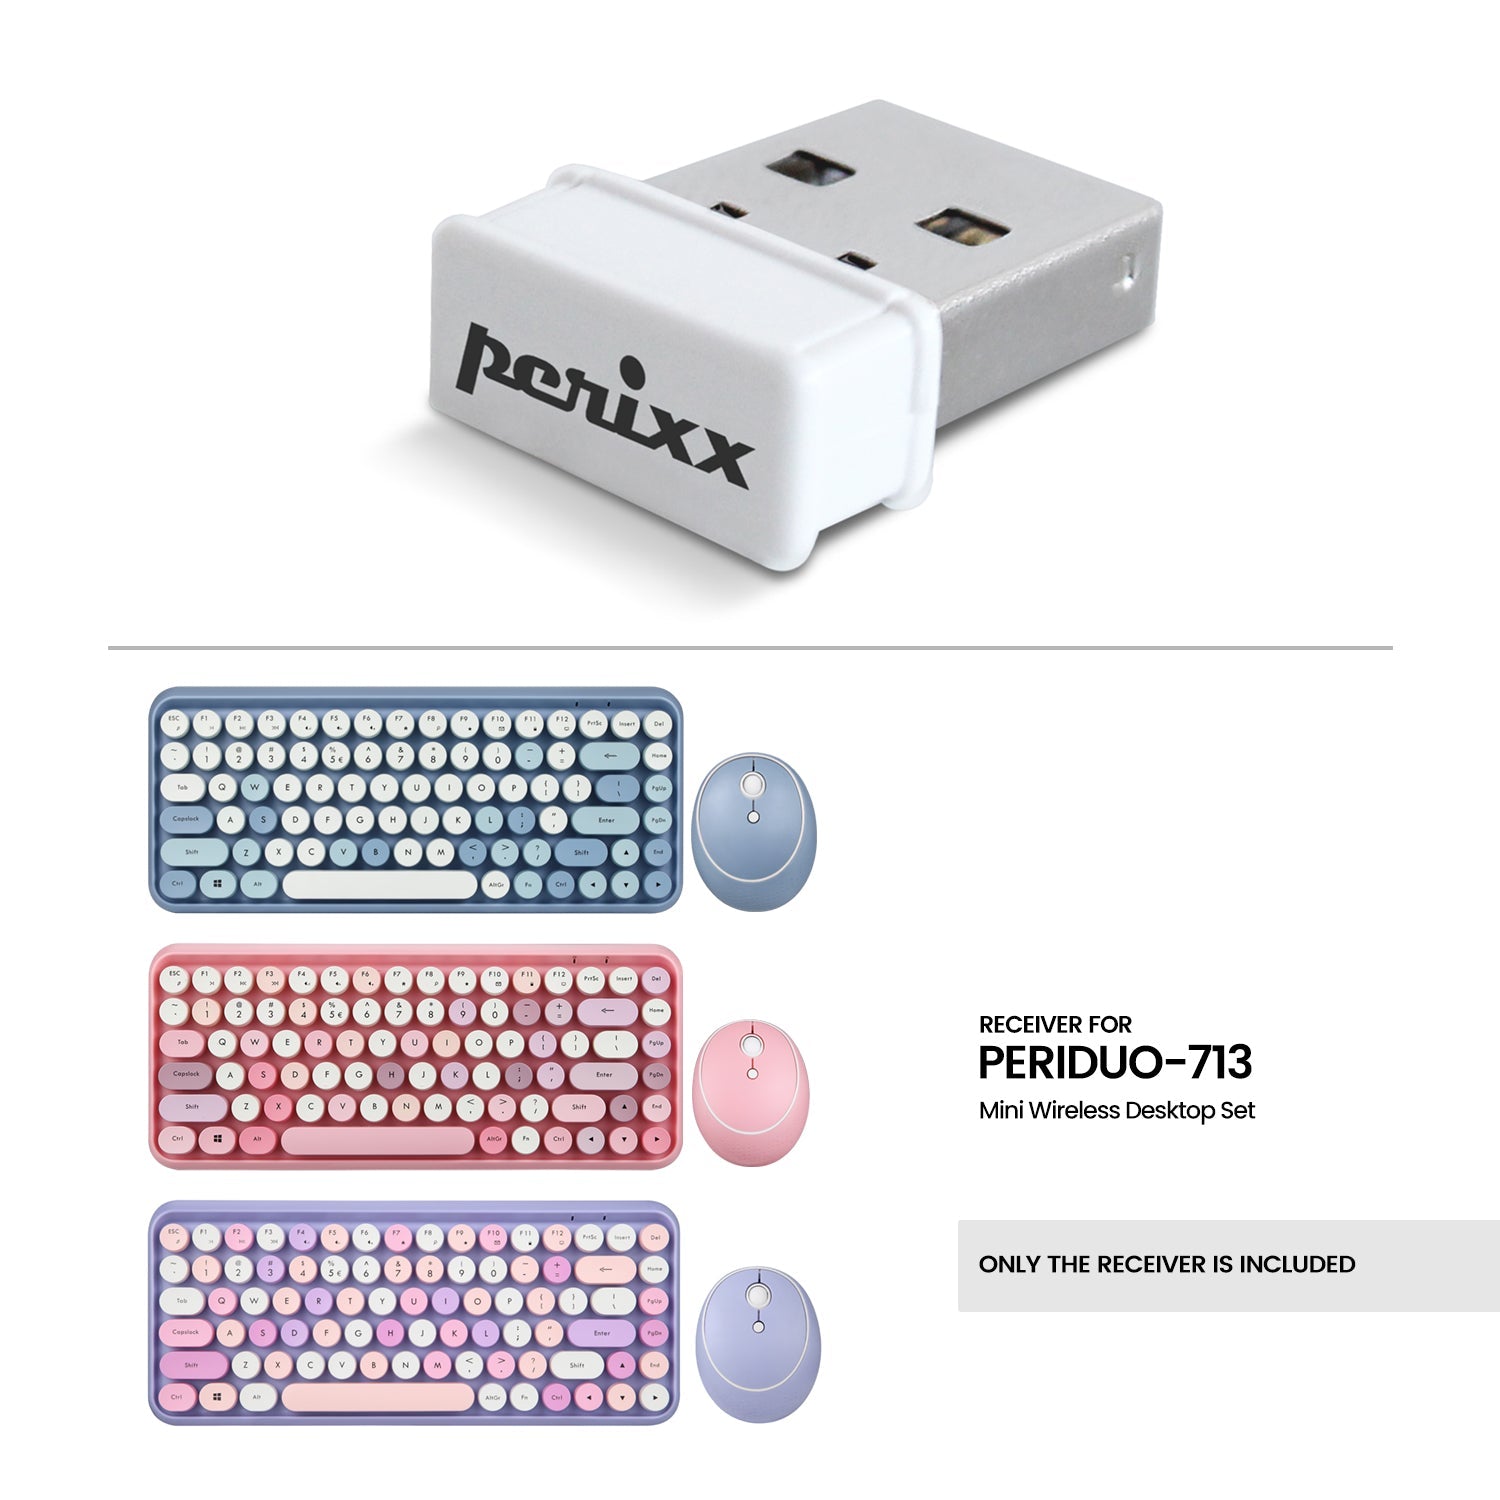 USB dongle receiver for PERIDUO-713 - Perixx Europe